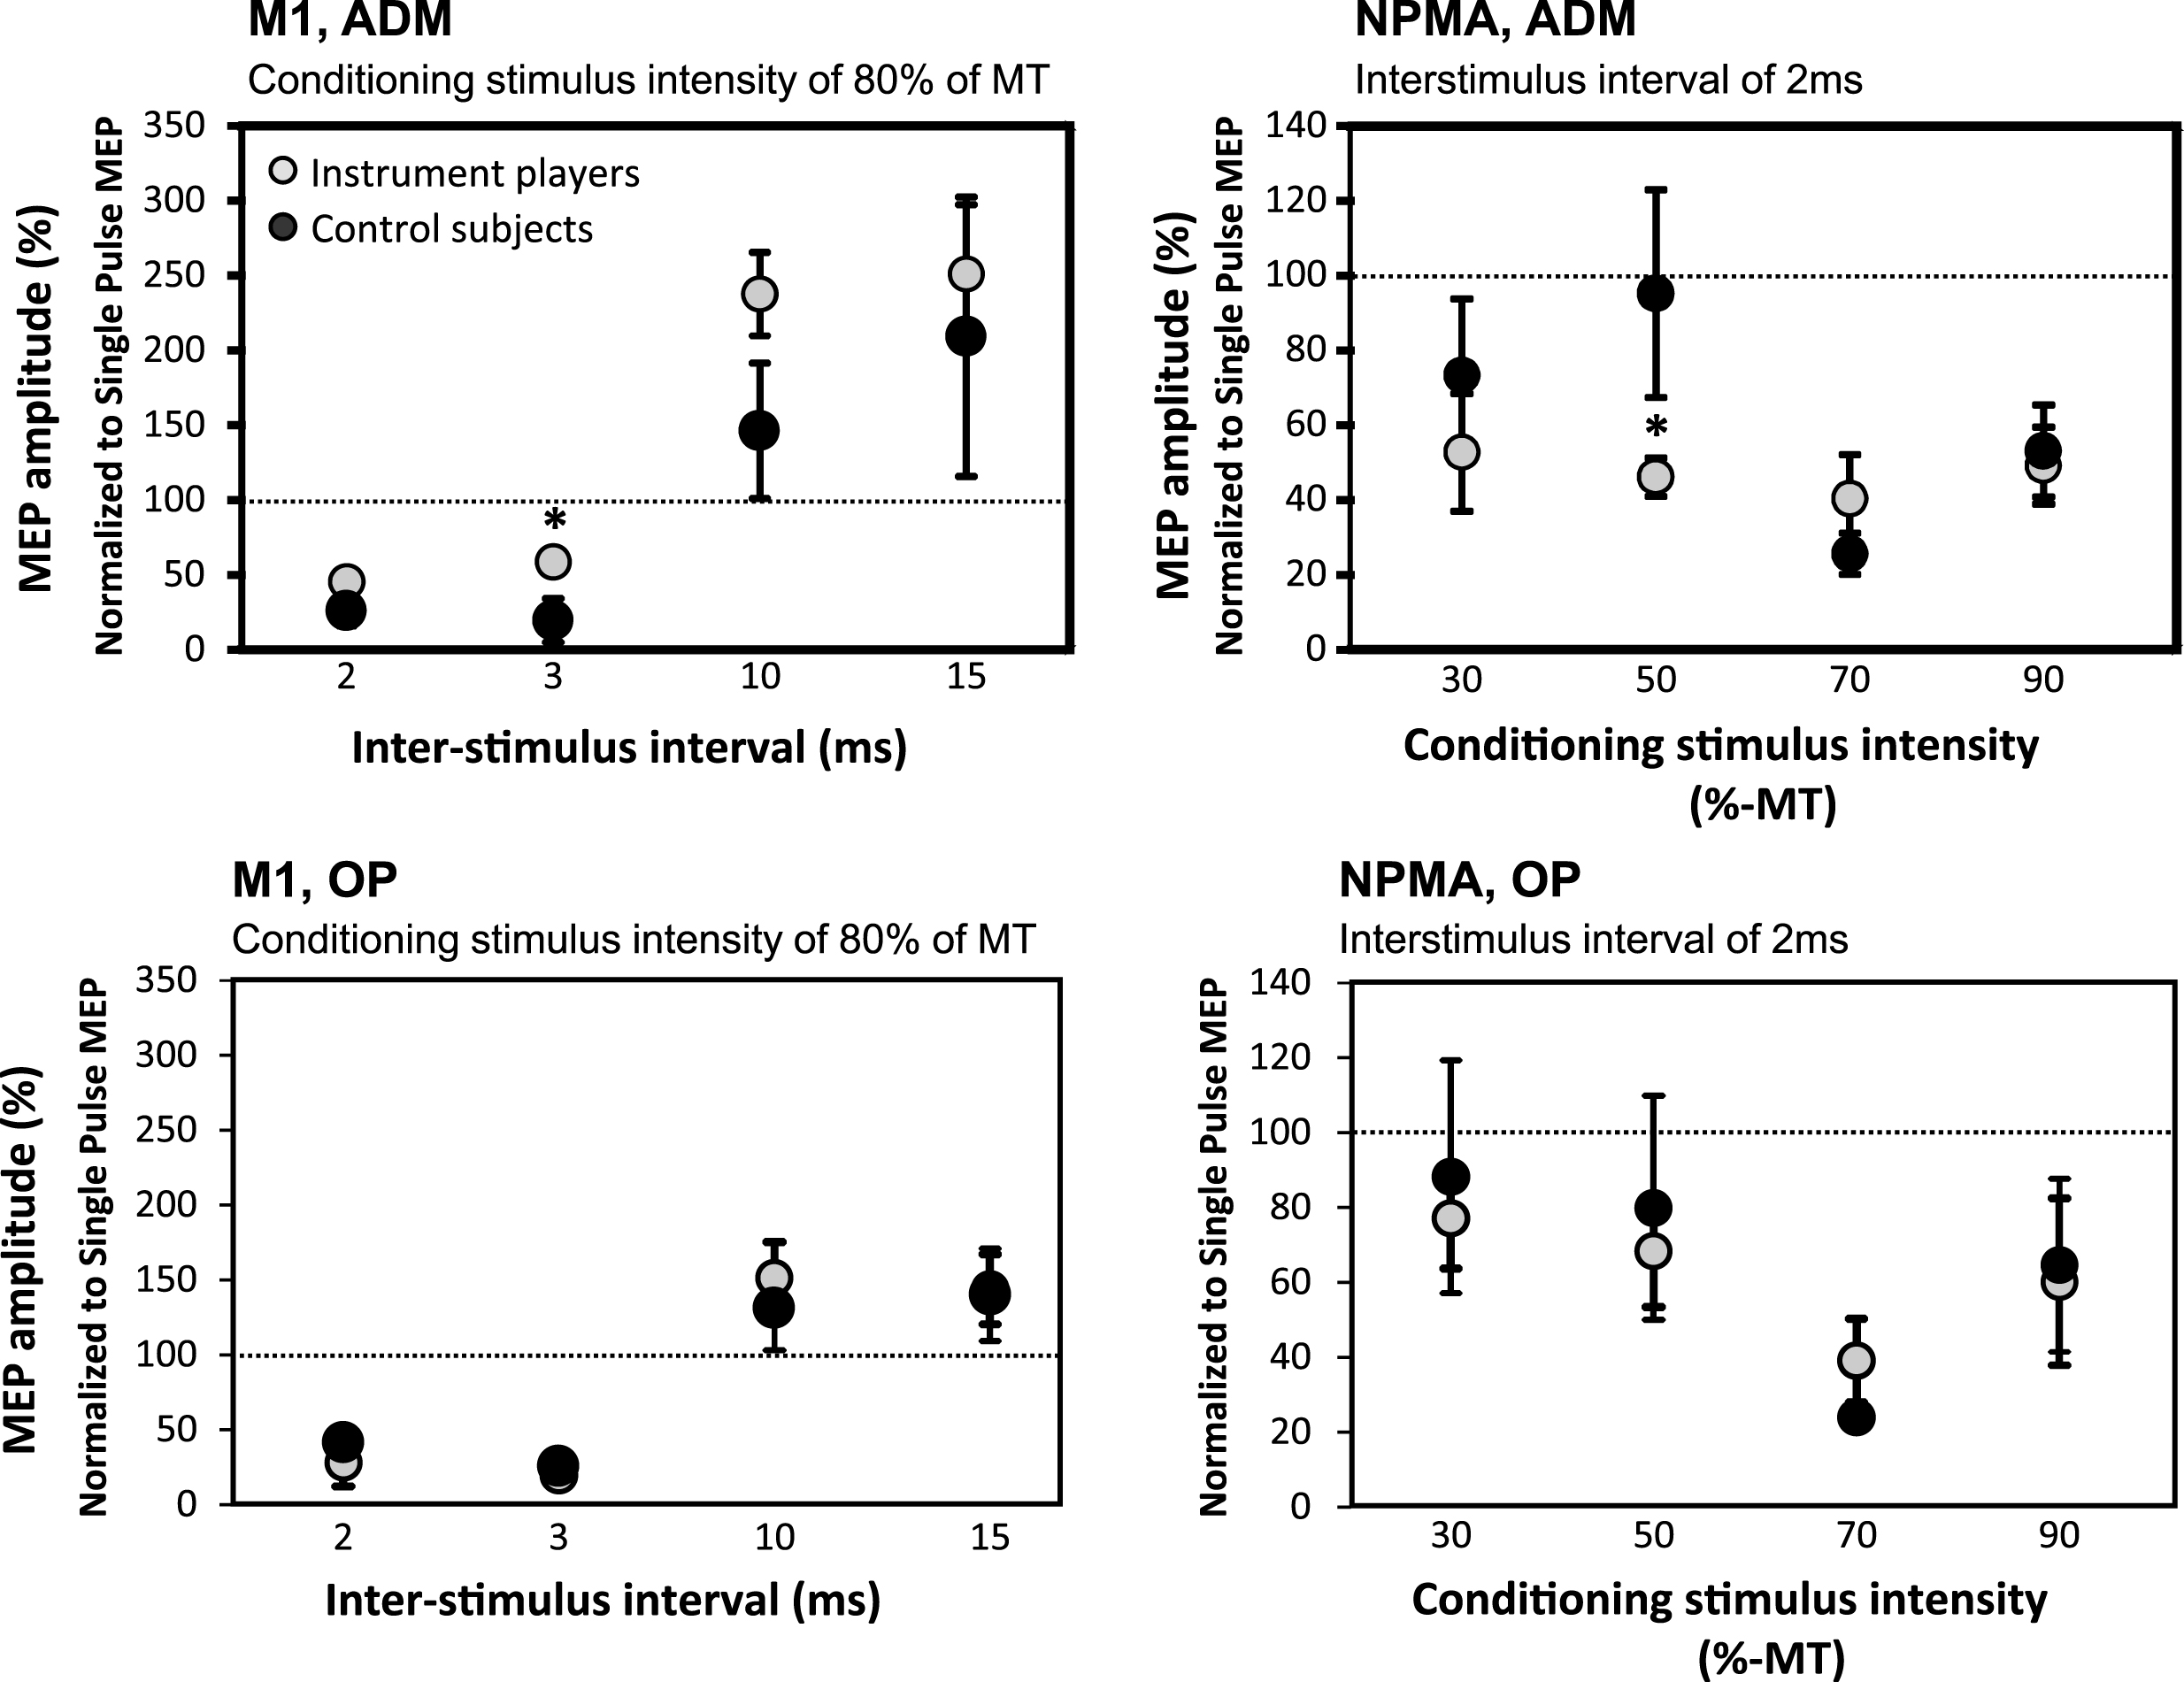 In the string-instrument players, SICI was decreased with 3 ms ISI in M1 ADM muscle representation (upper left) and increased with 50% CS intensity in NPMA ADM muscle representation (upper right) when compared with control subjects. These kinds of differences were not observed in OP muscle (lower panel).